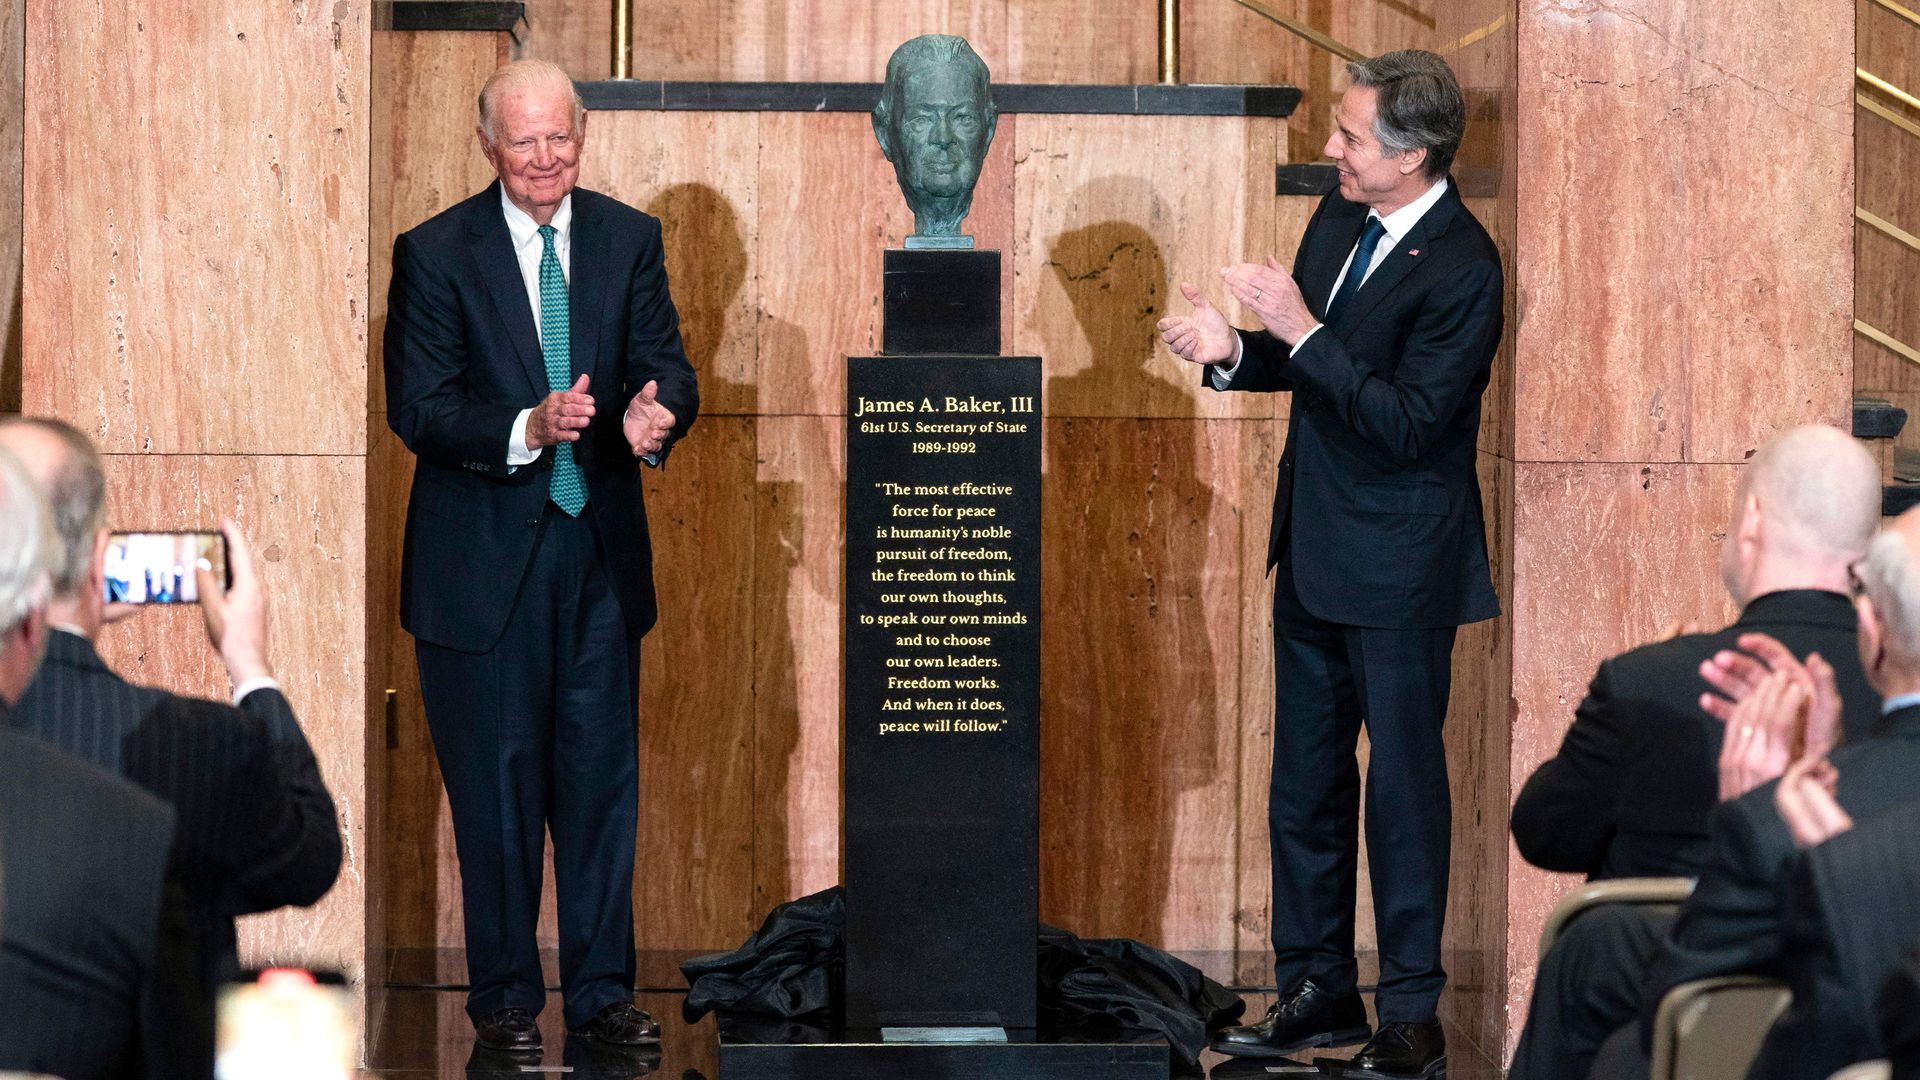 Secretary of State Antony Blinken is seen applauding with former Secretary James A. Baker III after unveiling a bust of Baker.